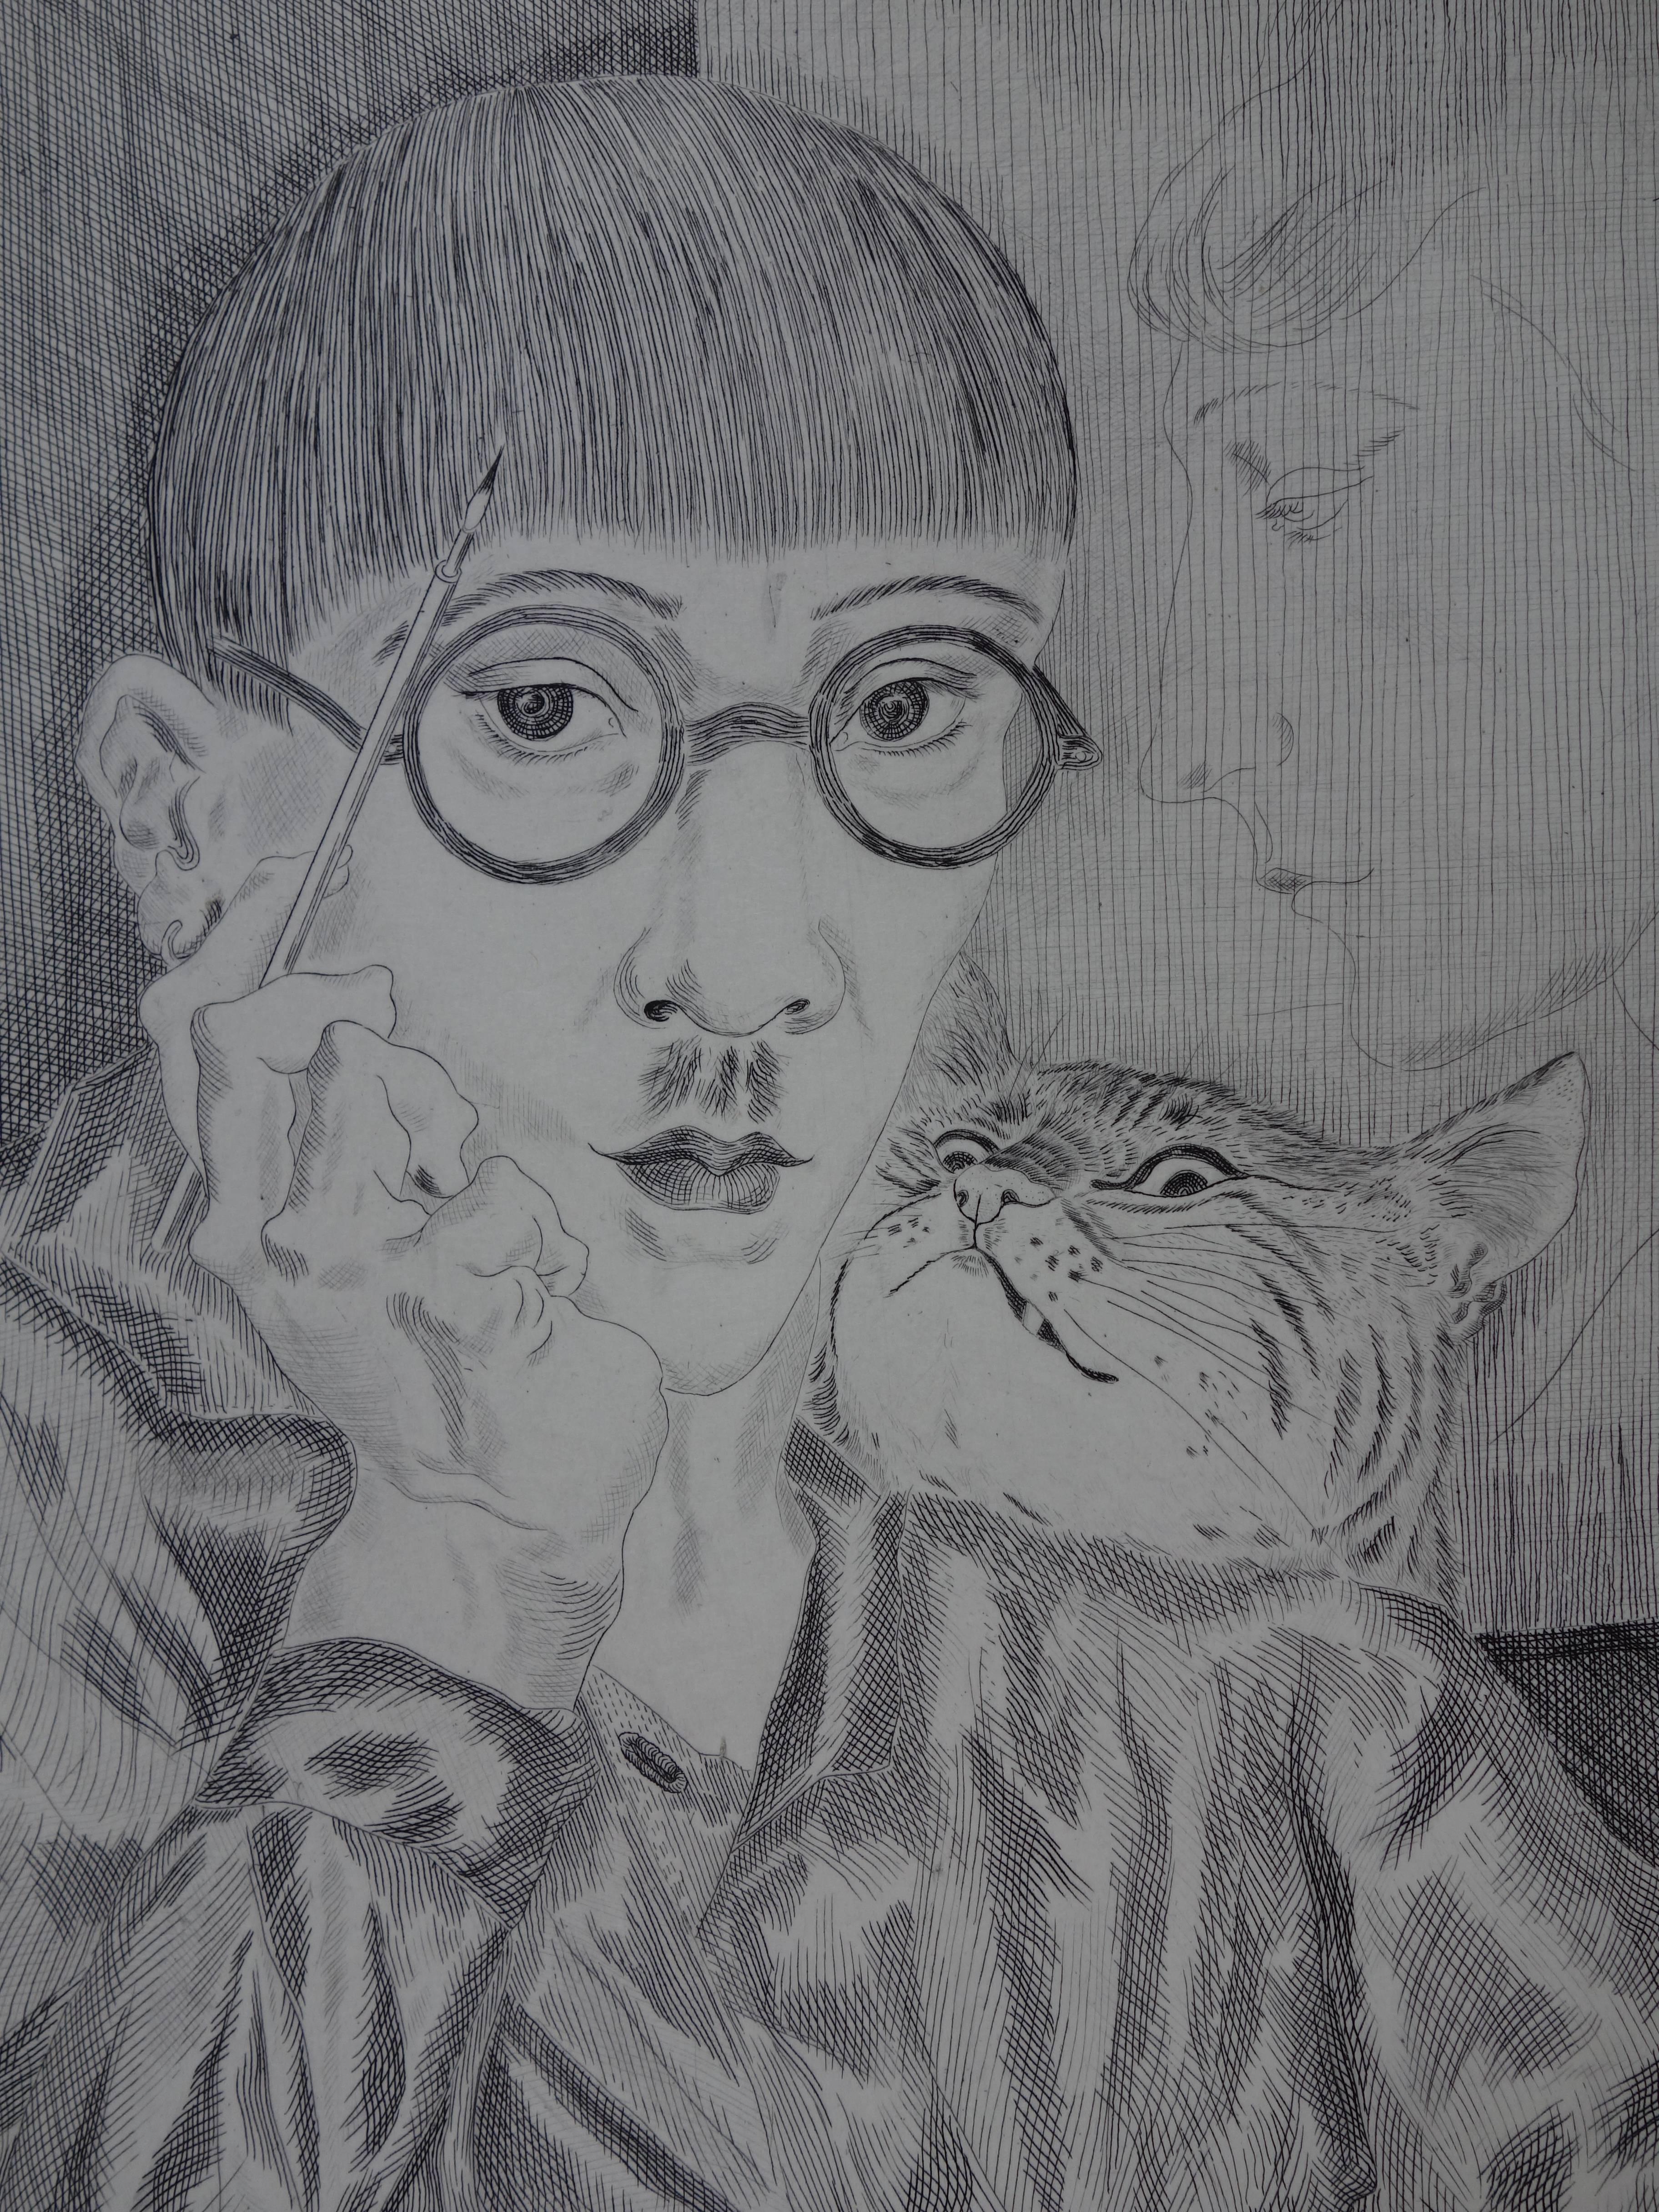 Leonard Tsuguharu FOUJITA
Self portrait  with a cat

Original drypoint etching
Printed signature in the plate
On vellum 65 x 50 cm (c. 26 x 20in)
Rare proof on Japan paper applied on vellum
Posthumous edition by Chalcographie du Louvre,